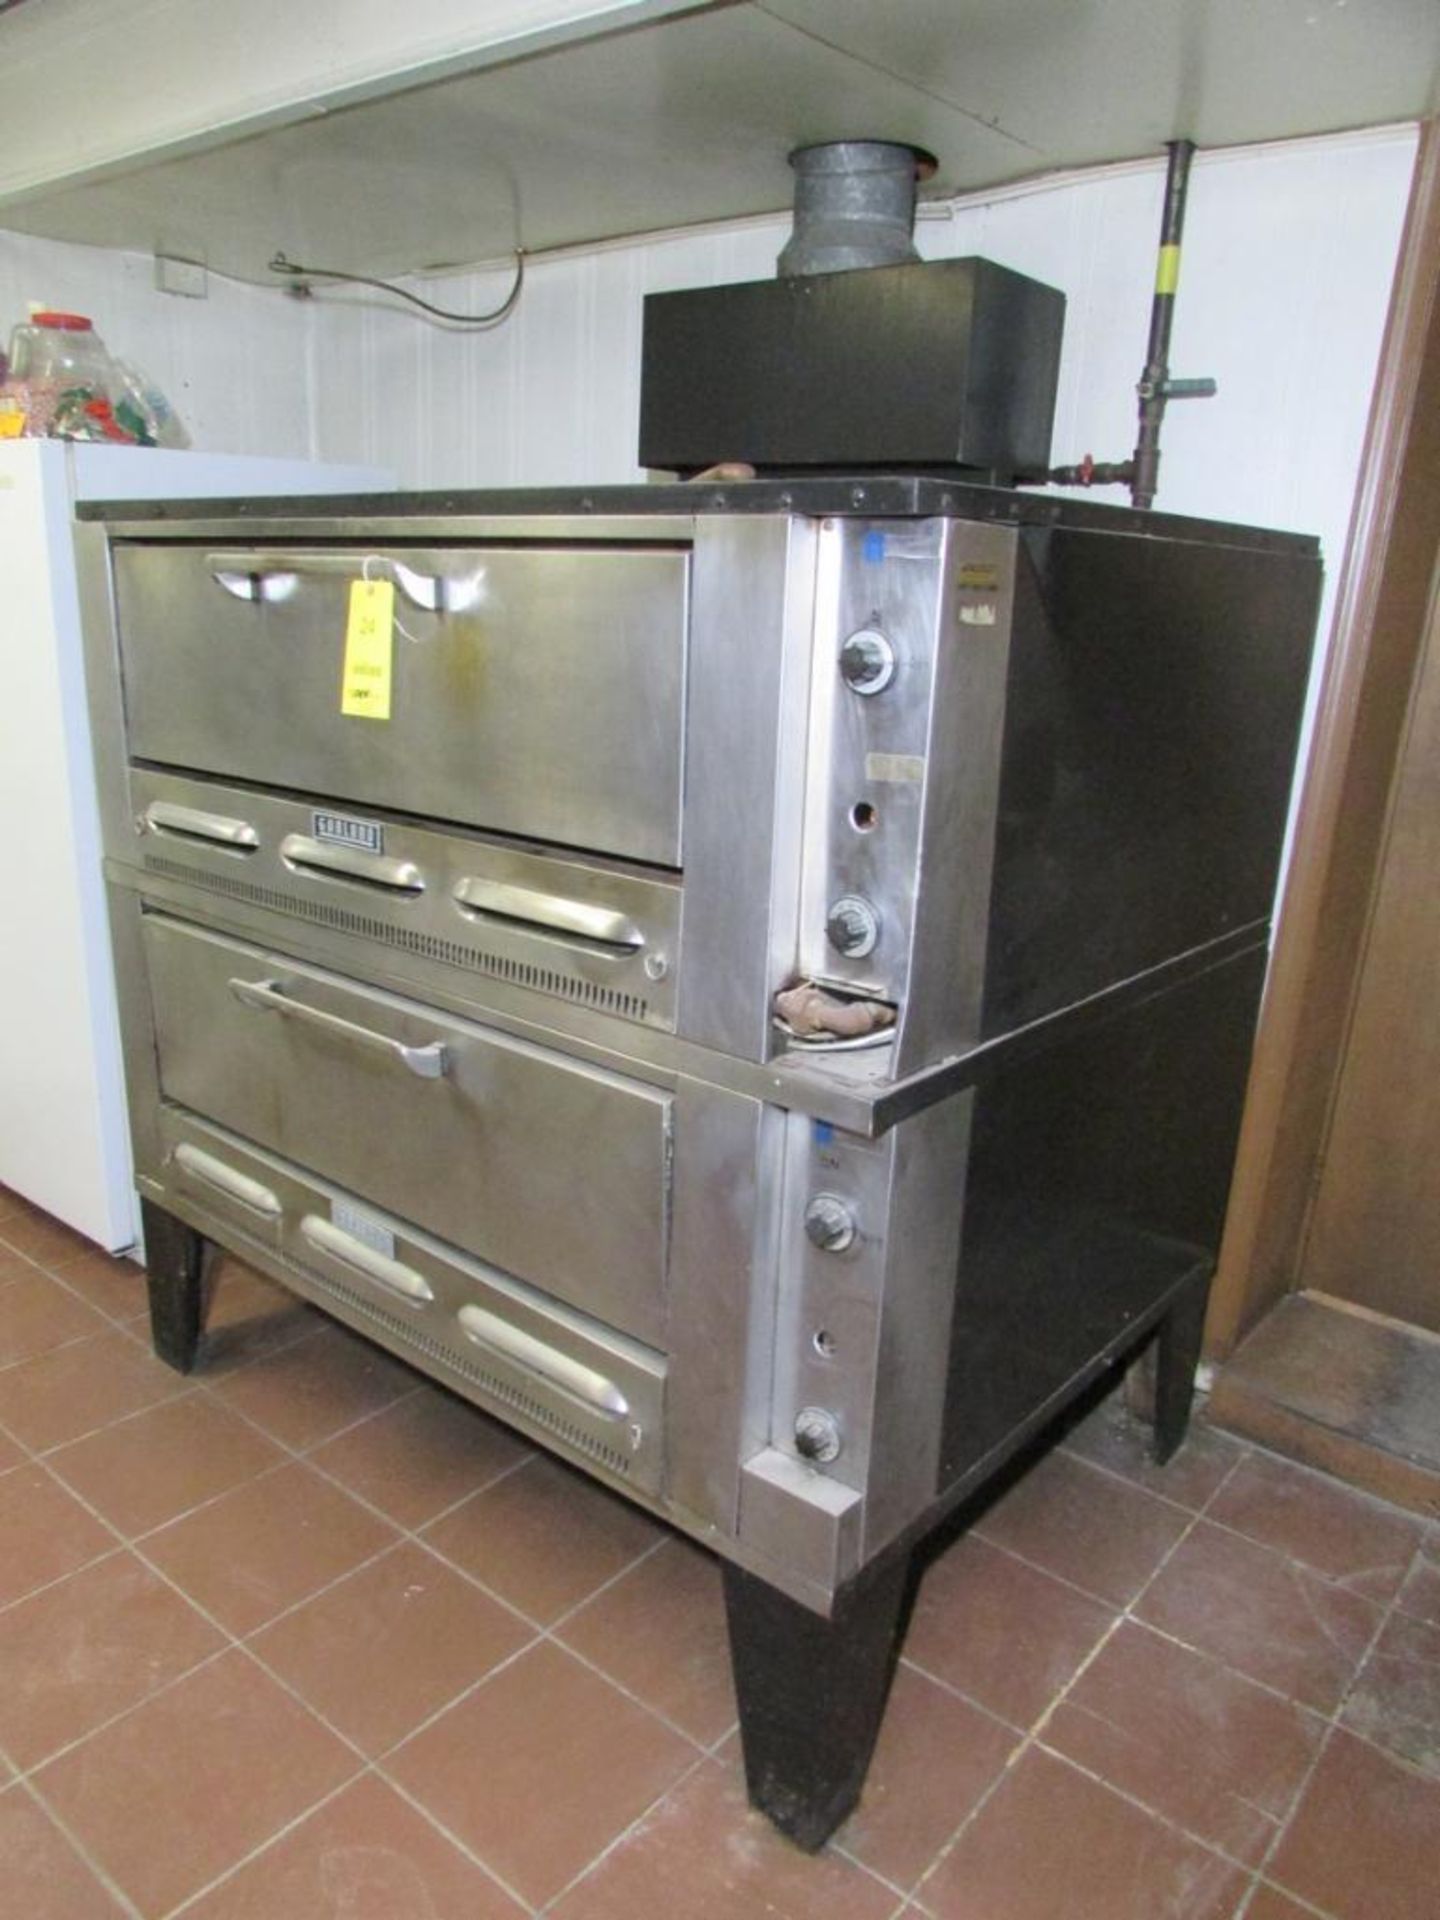 Garland Double Deck Natural Gas Convection Pizza Oven. 48"x13" Doors, Approx 48"x36"x9" Oven Chamber